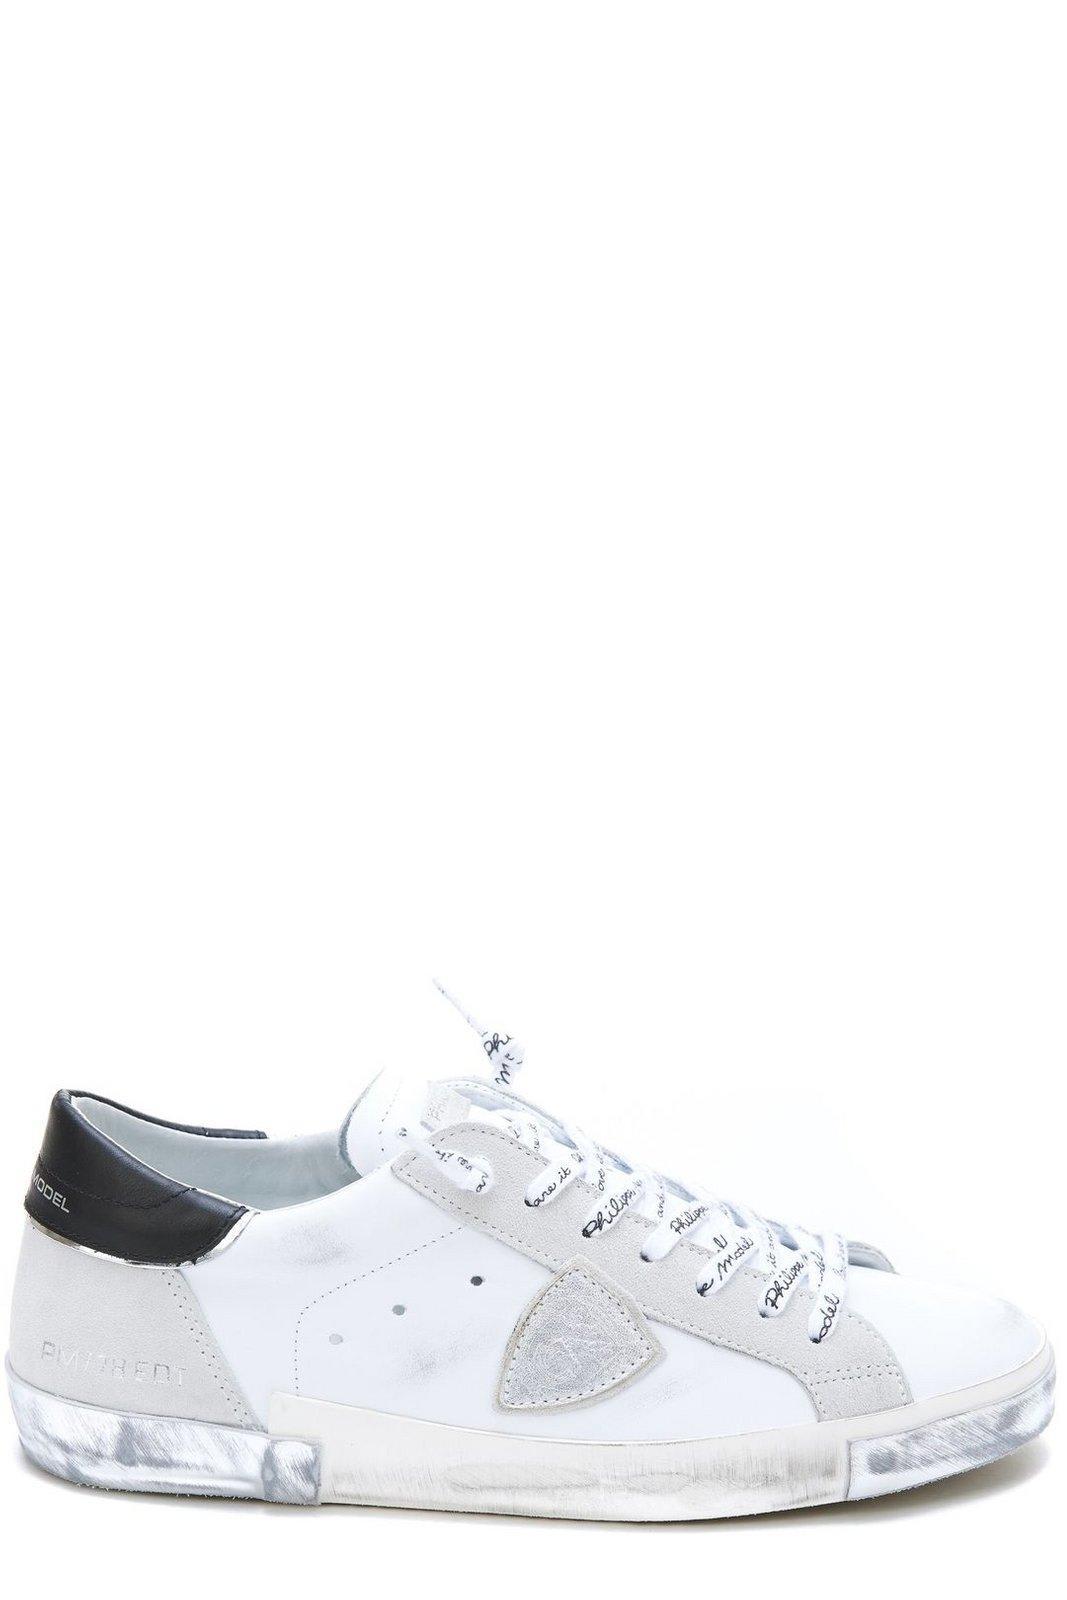 Philippe Model Prsx Mixage Pop Lace-up Sneakers in White for Men | Lyst